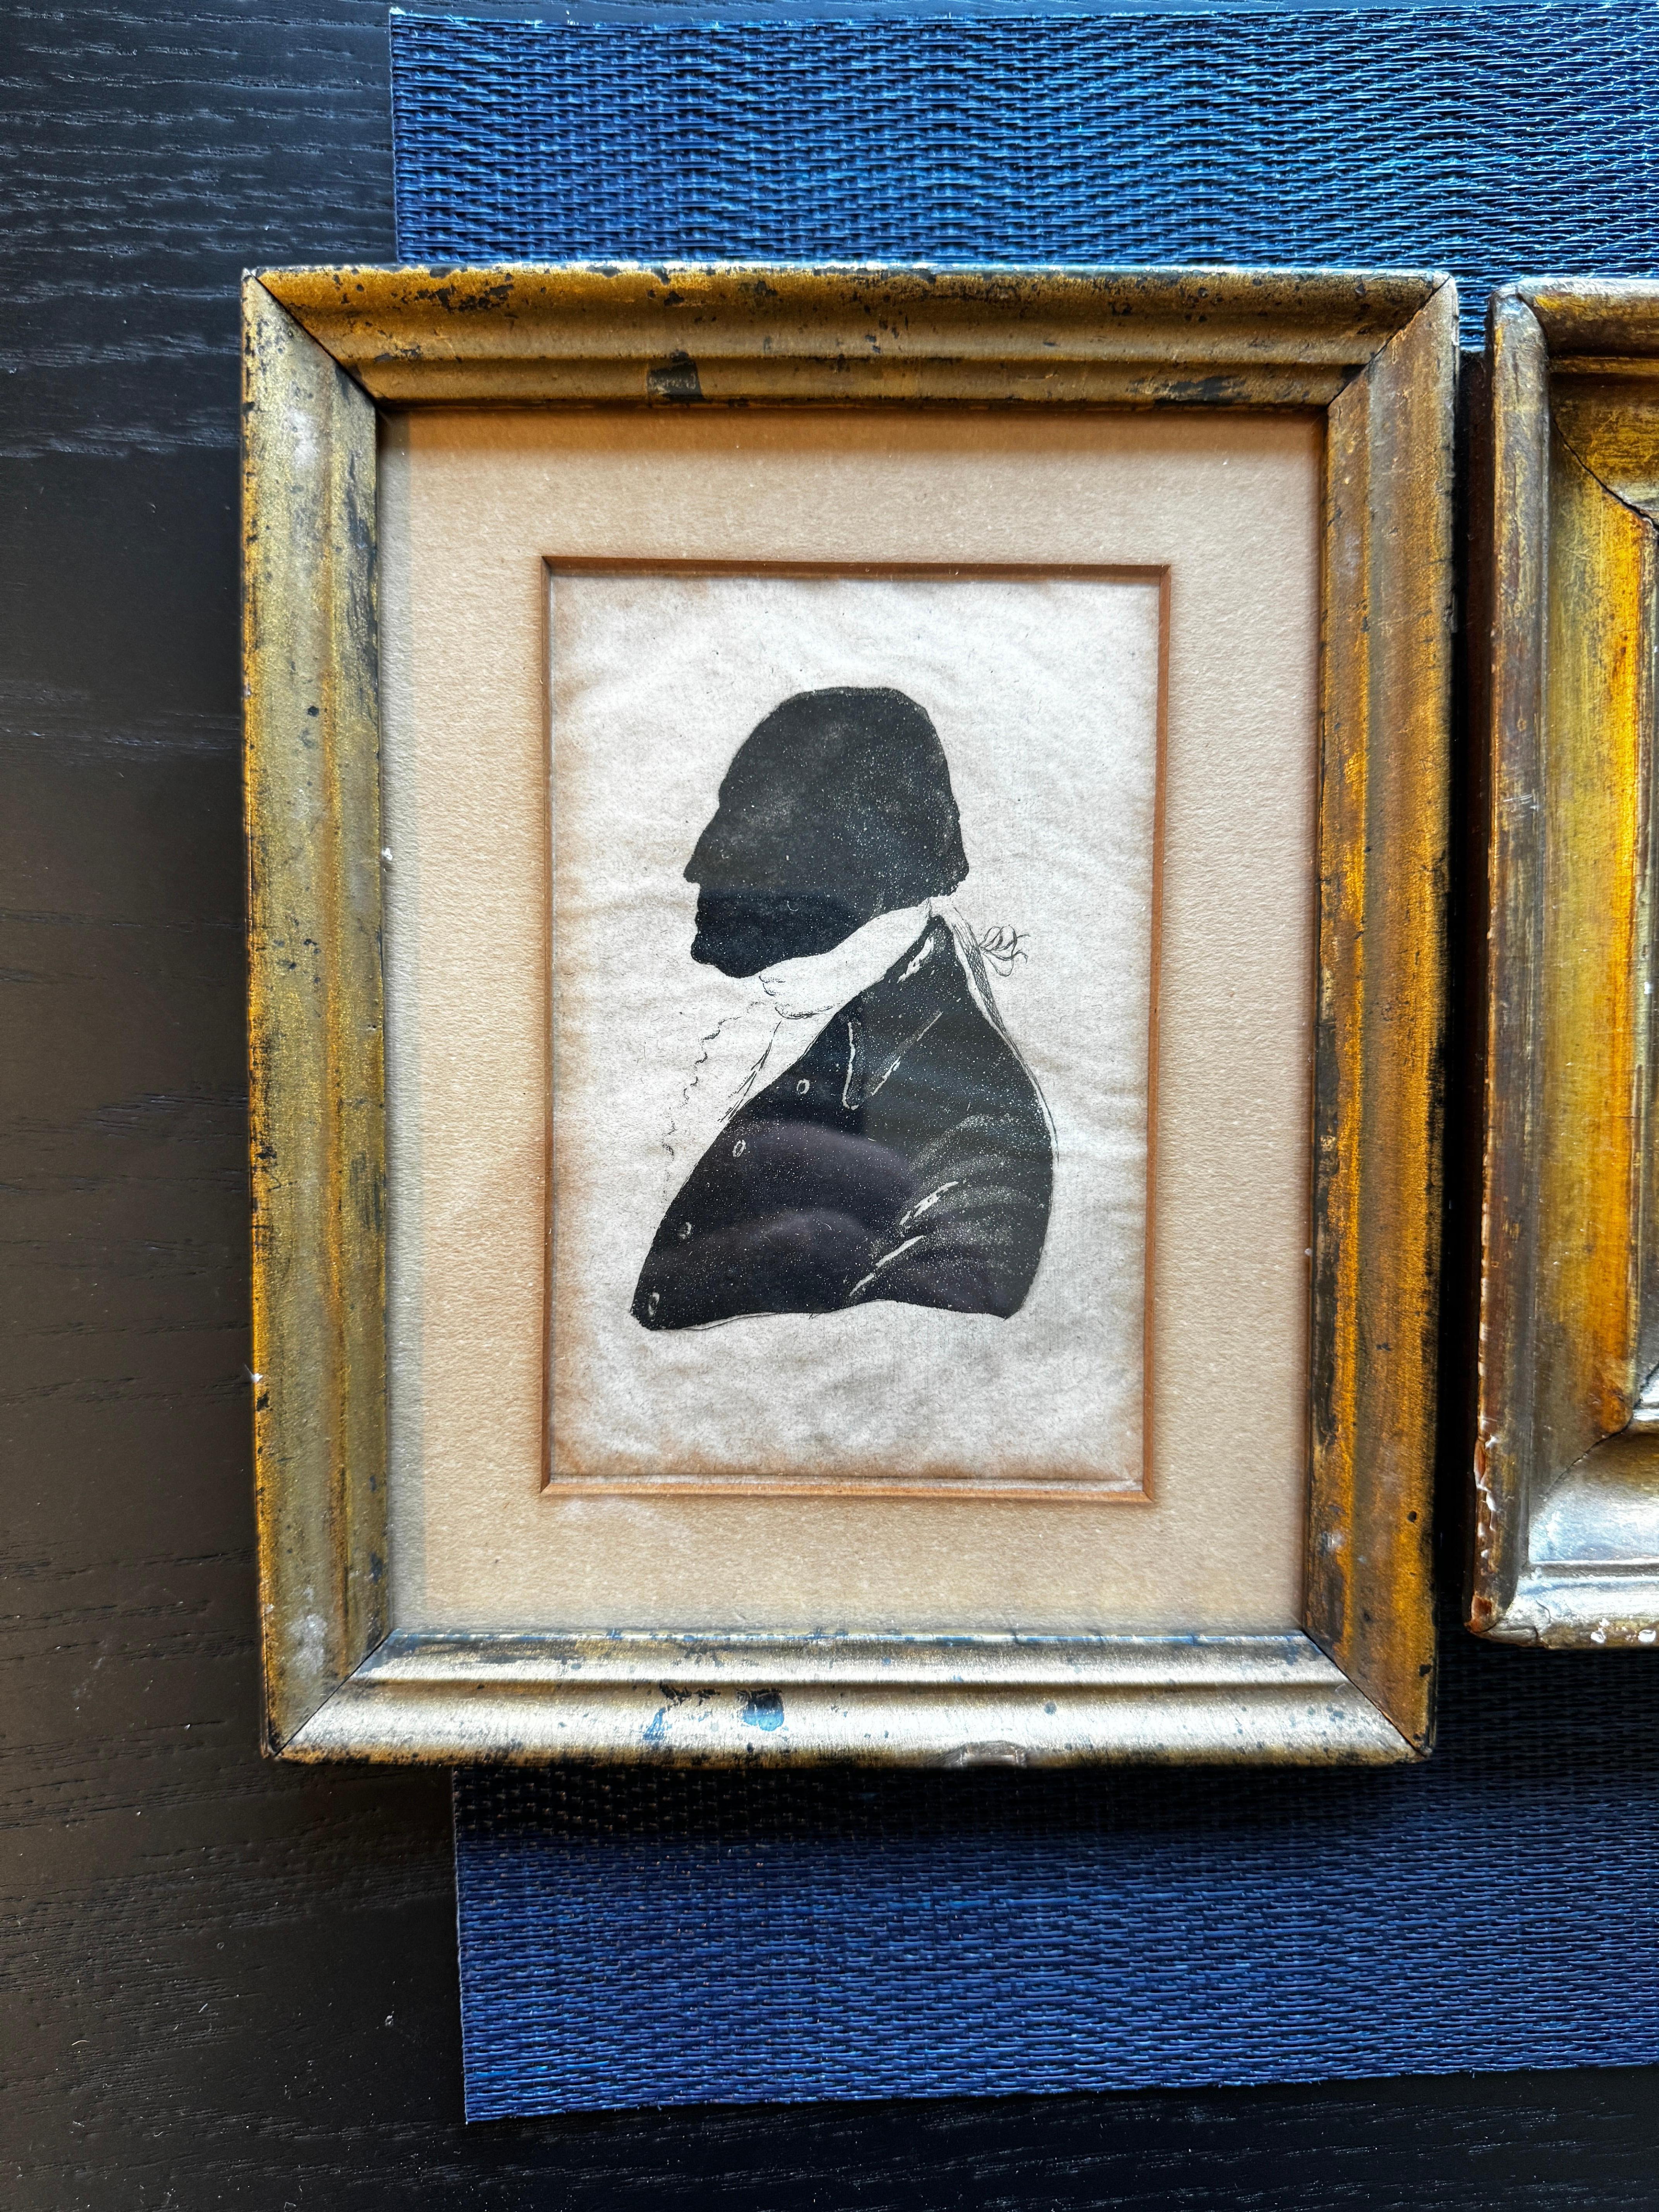 Group of Three 19th Century Framed Painted Silhouettes

 
Framed in black: Male: 6.25x7.75, unframed 5.5x7
Framed in black: Female: 4.75x6.25, unframed 2.x2.75
Gilded frame: Female: 5.5x6.5, unframed 3x4 